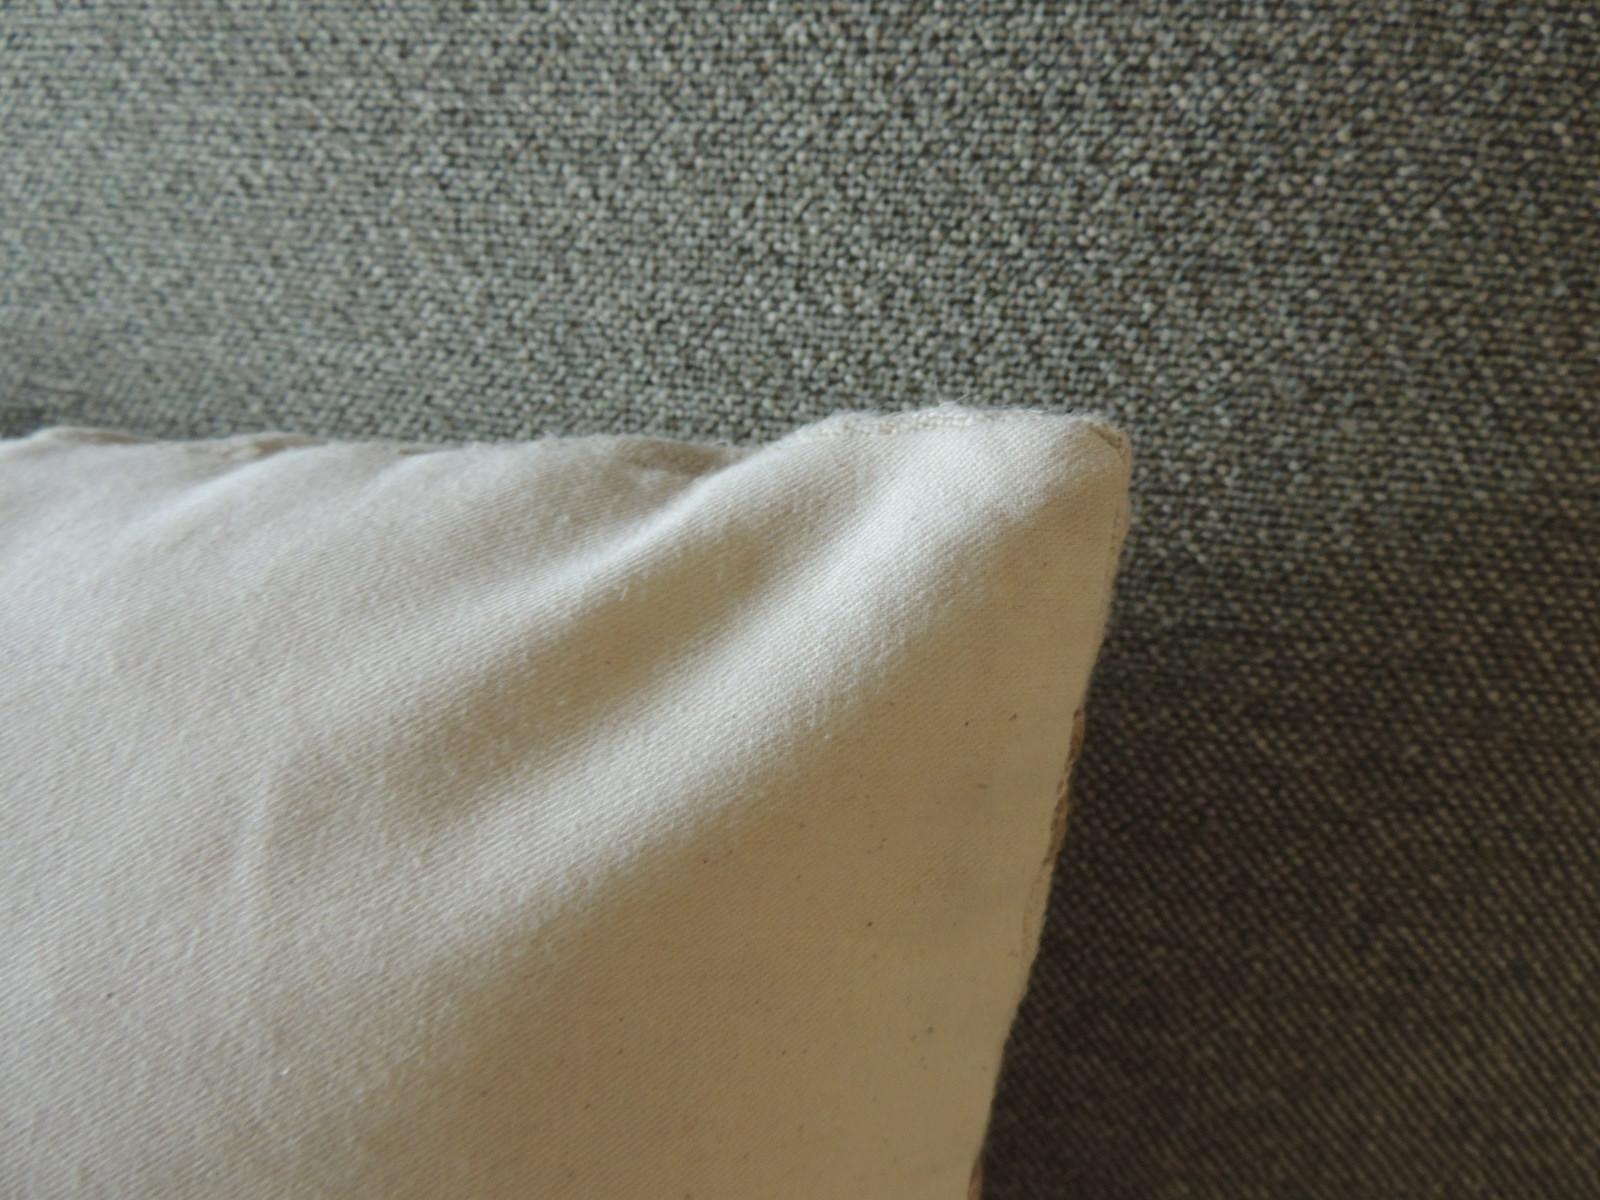 Antique Linen Decorative Bolster Pillow with Vintage Jute Trim In Good Condition For Sale In Oakland Park, FL